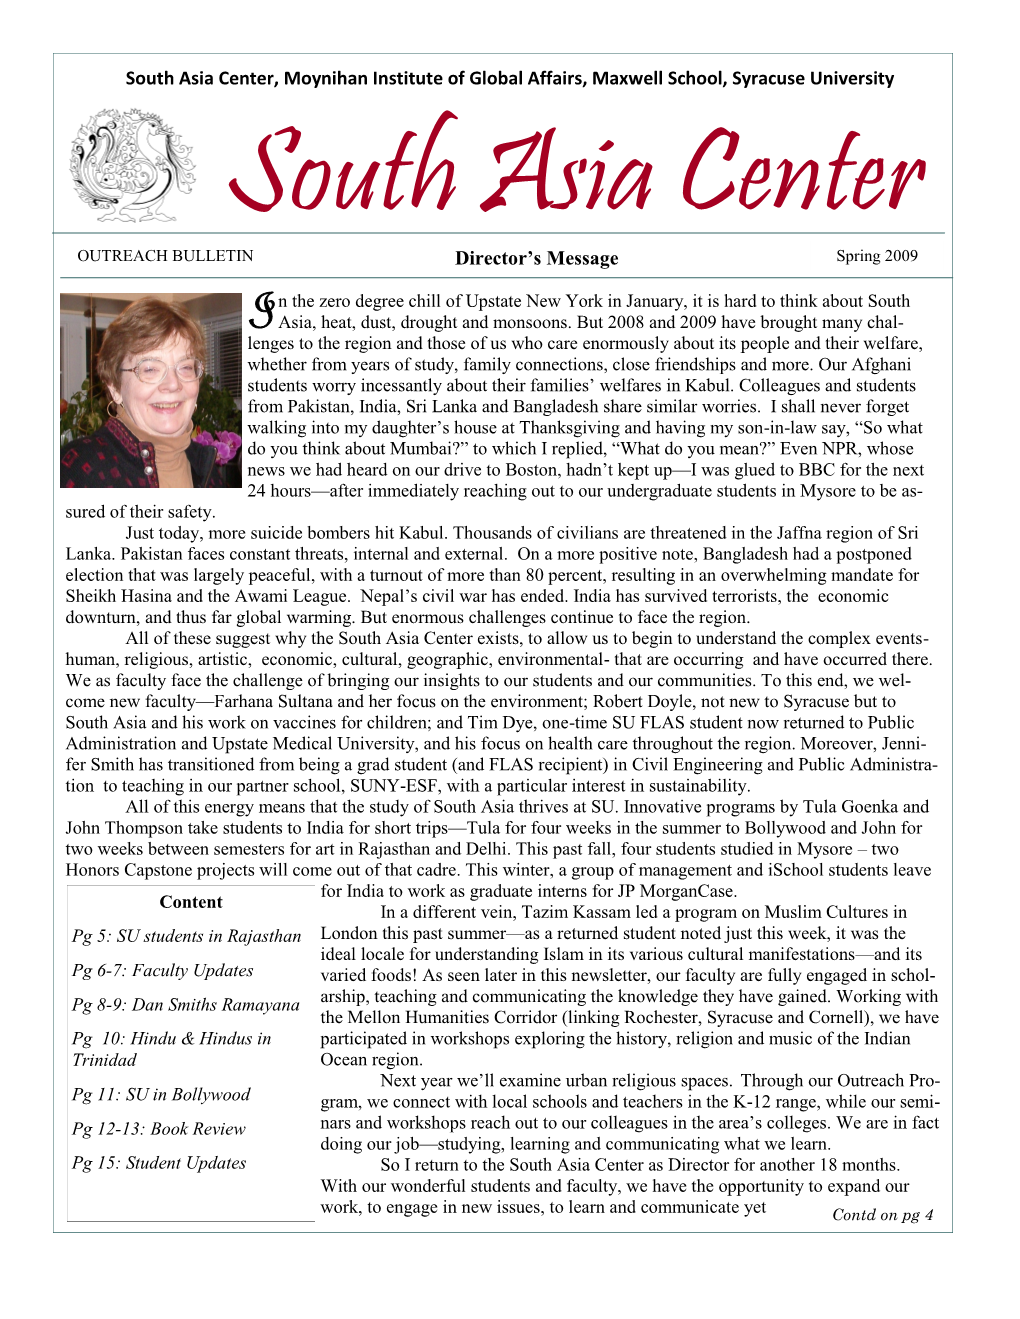 Director's Message South Asia Center, Moynihan Institute of Global